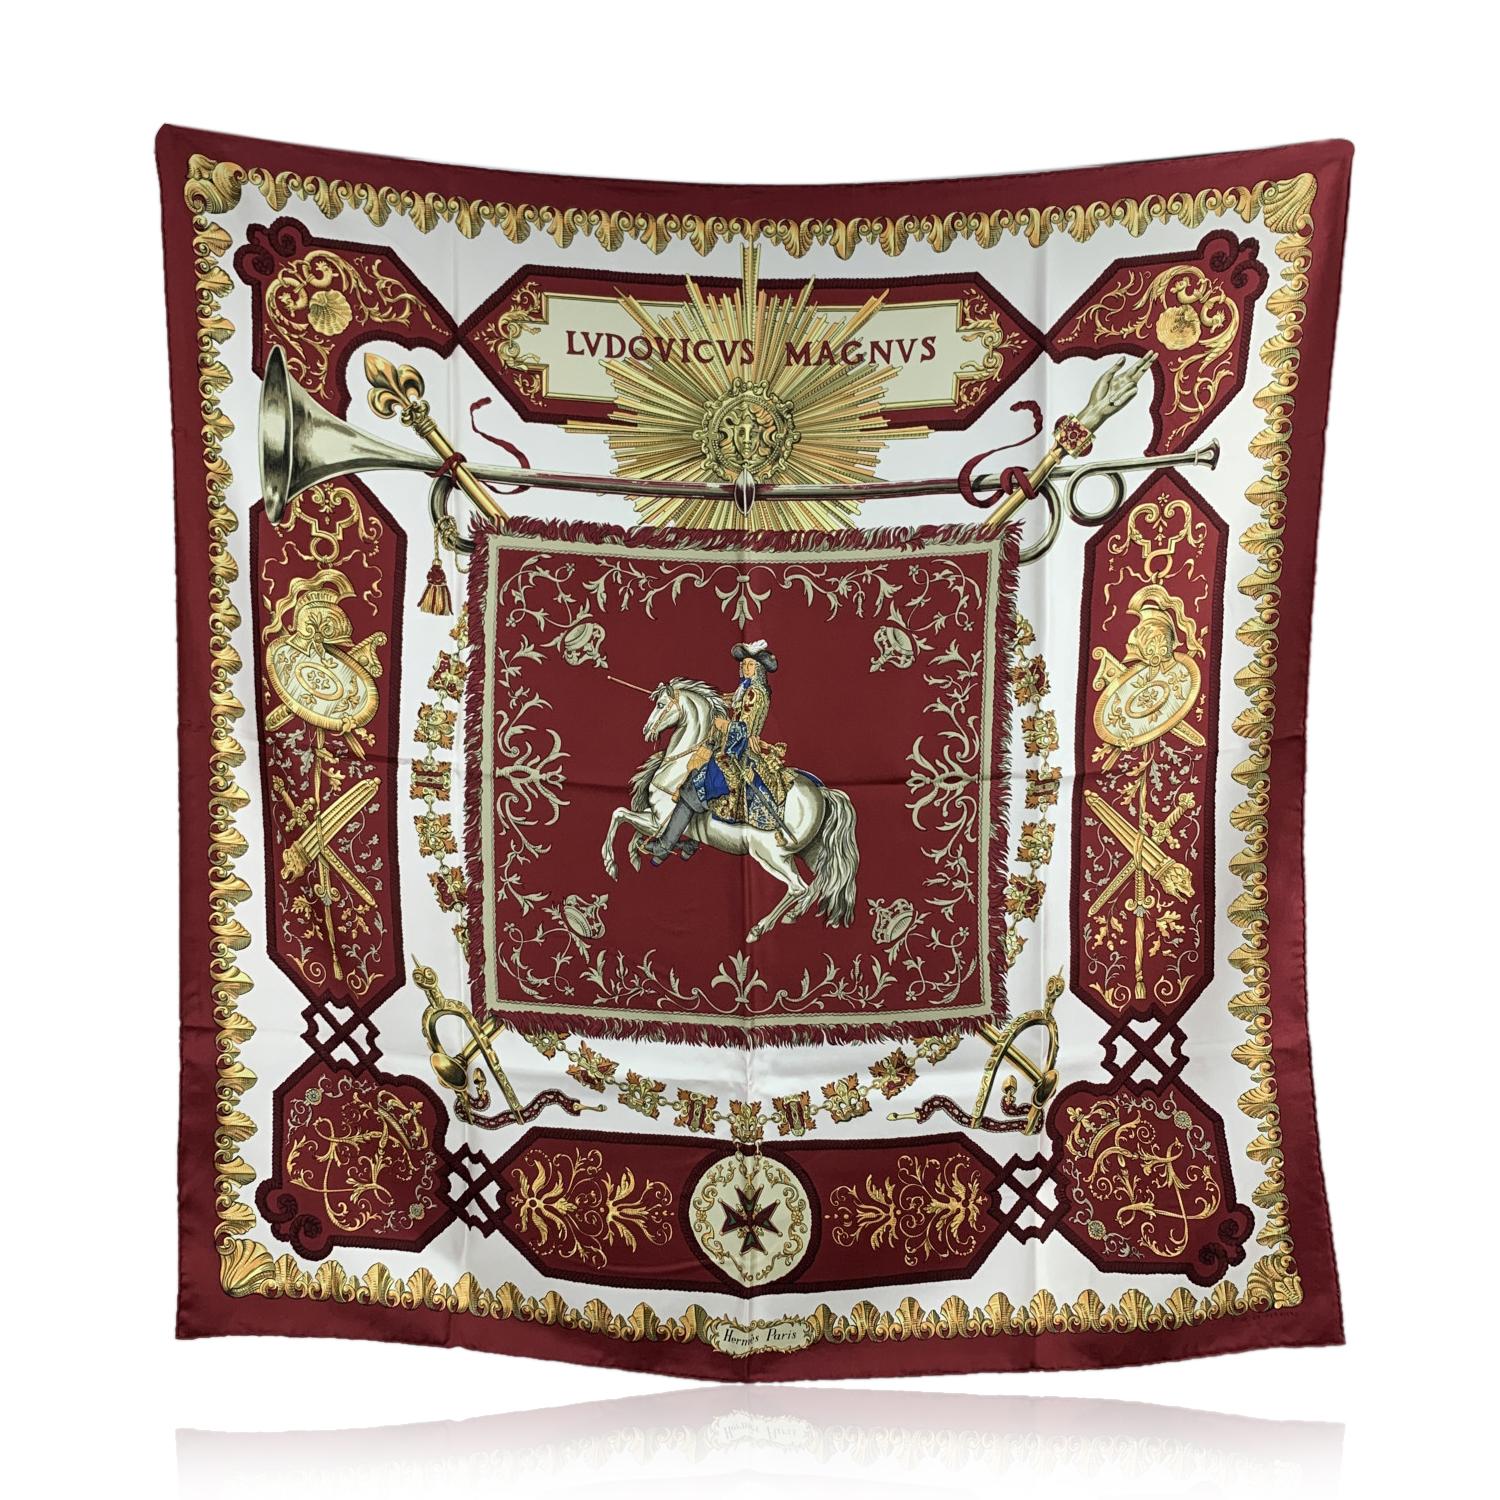 Hermes Vintage Burgundy Silk Scarf Ludovicus Magnus de la Perriere In Good Condition For Sale In Rome, Rome